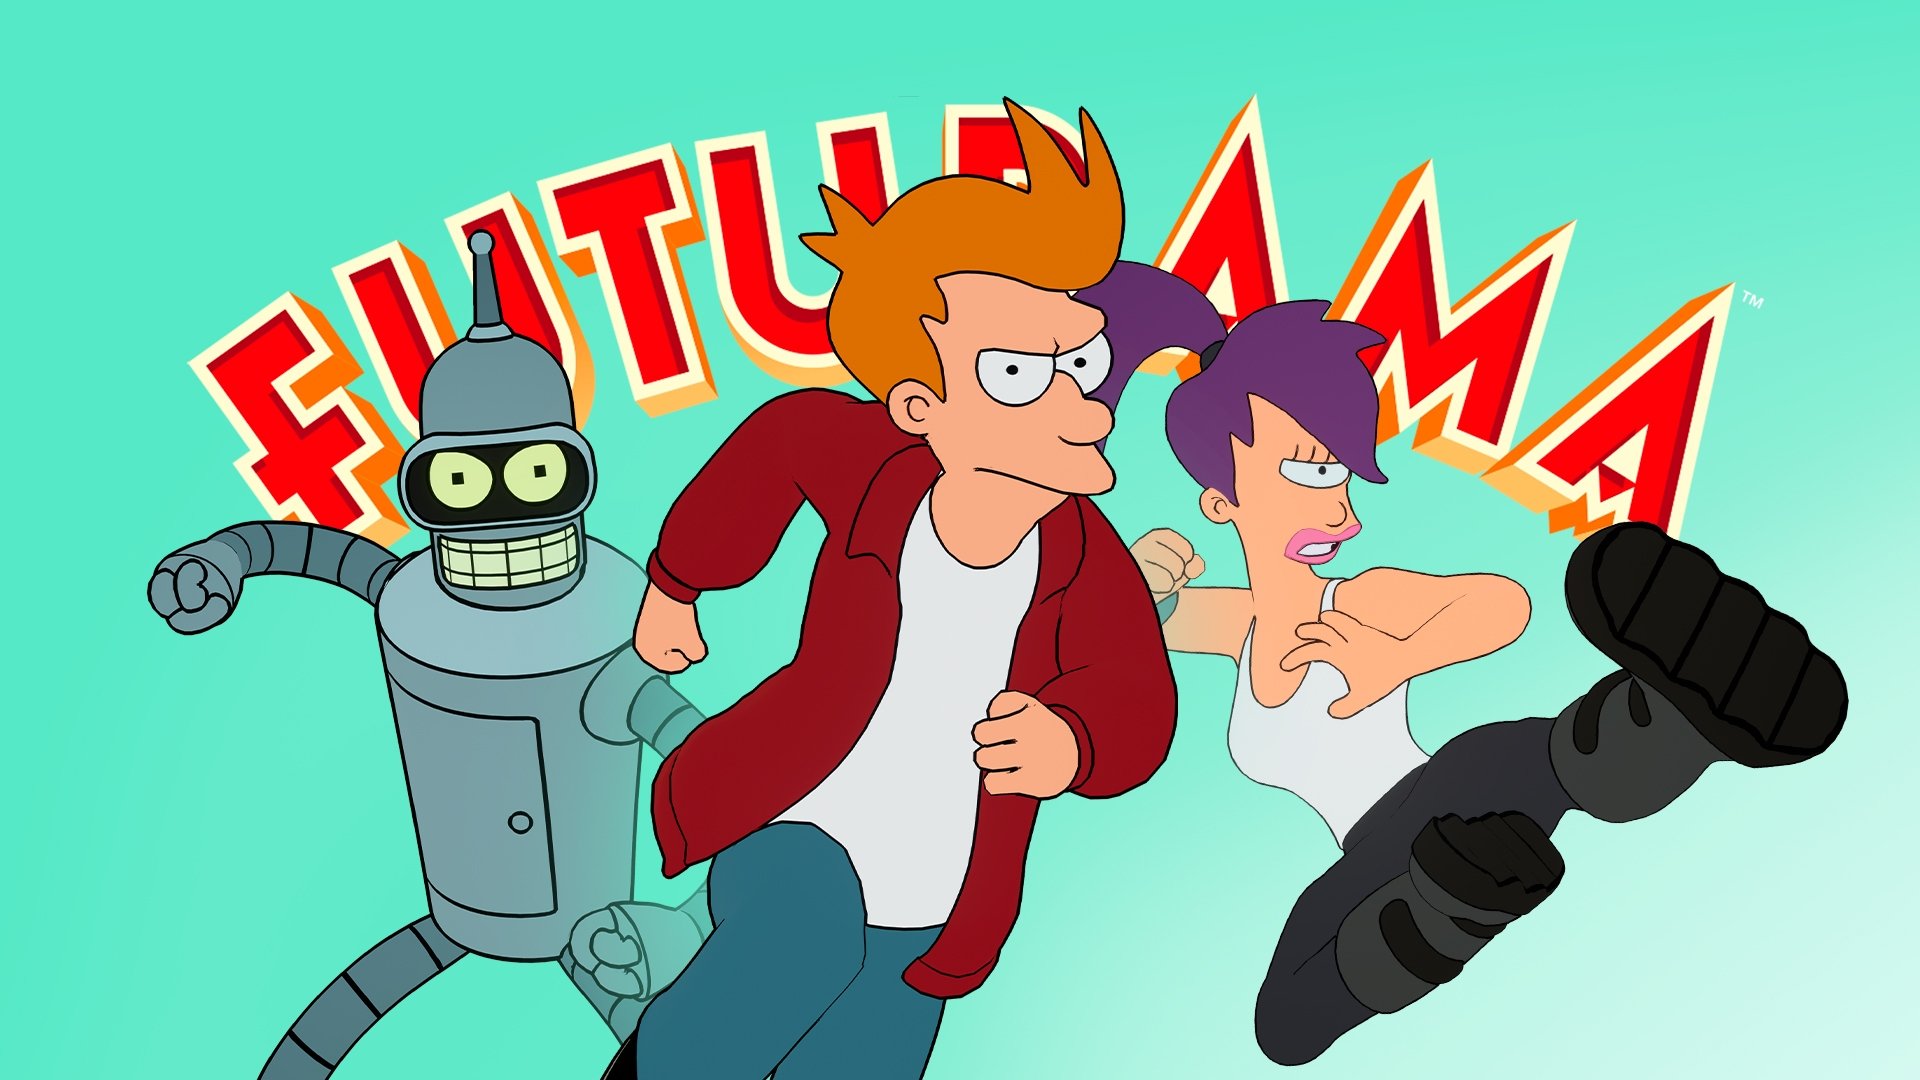 Futurama at Fortnite with new Bender, Fry and Leela outfits Meristation